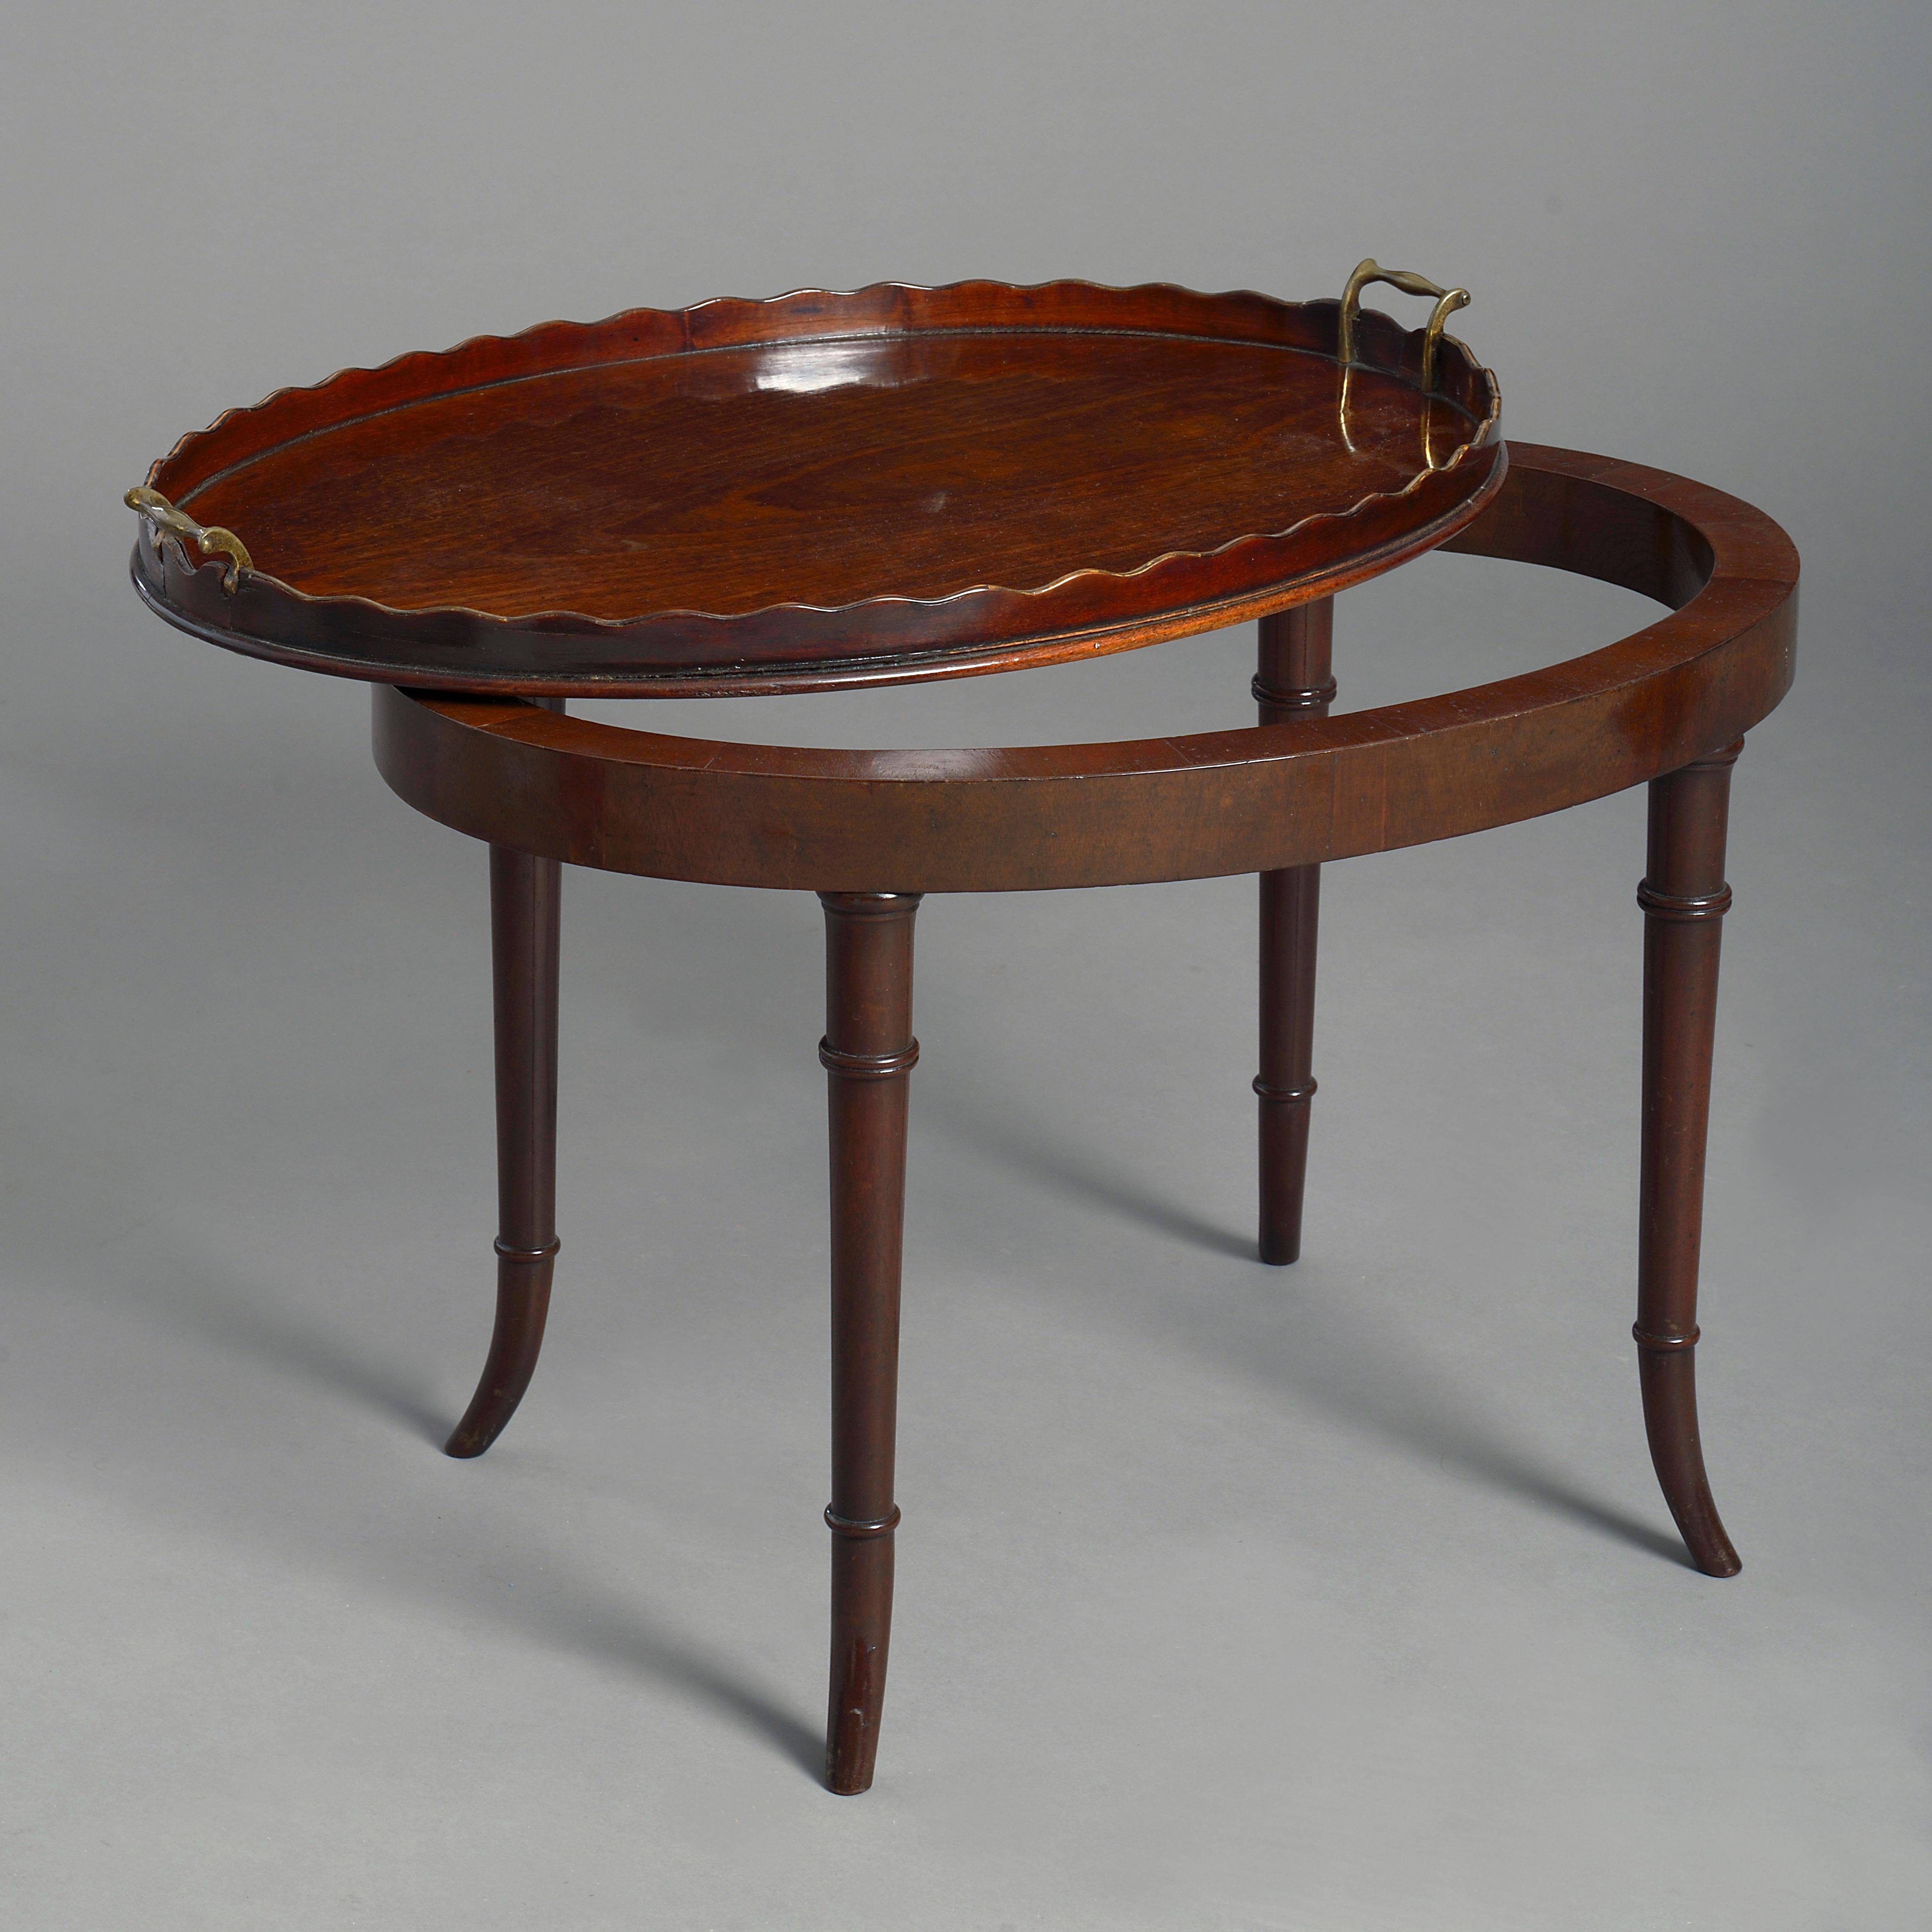 A late 18th century George III period mahogany oval tray, the scalloped galleried border inlaid with boxwood, having shaped brass carrying handles at either end. Now mounted as a low table.